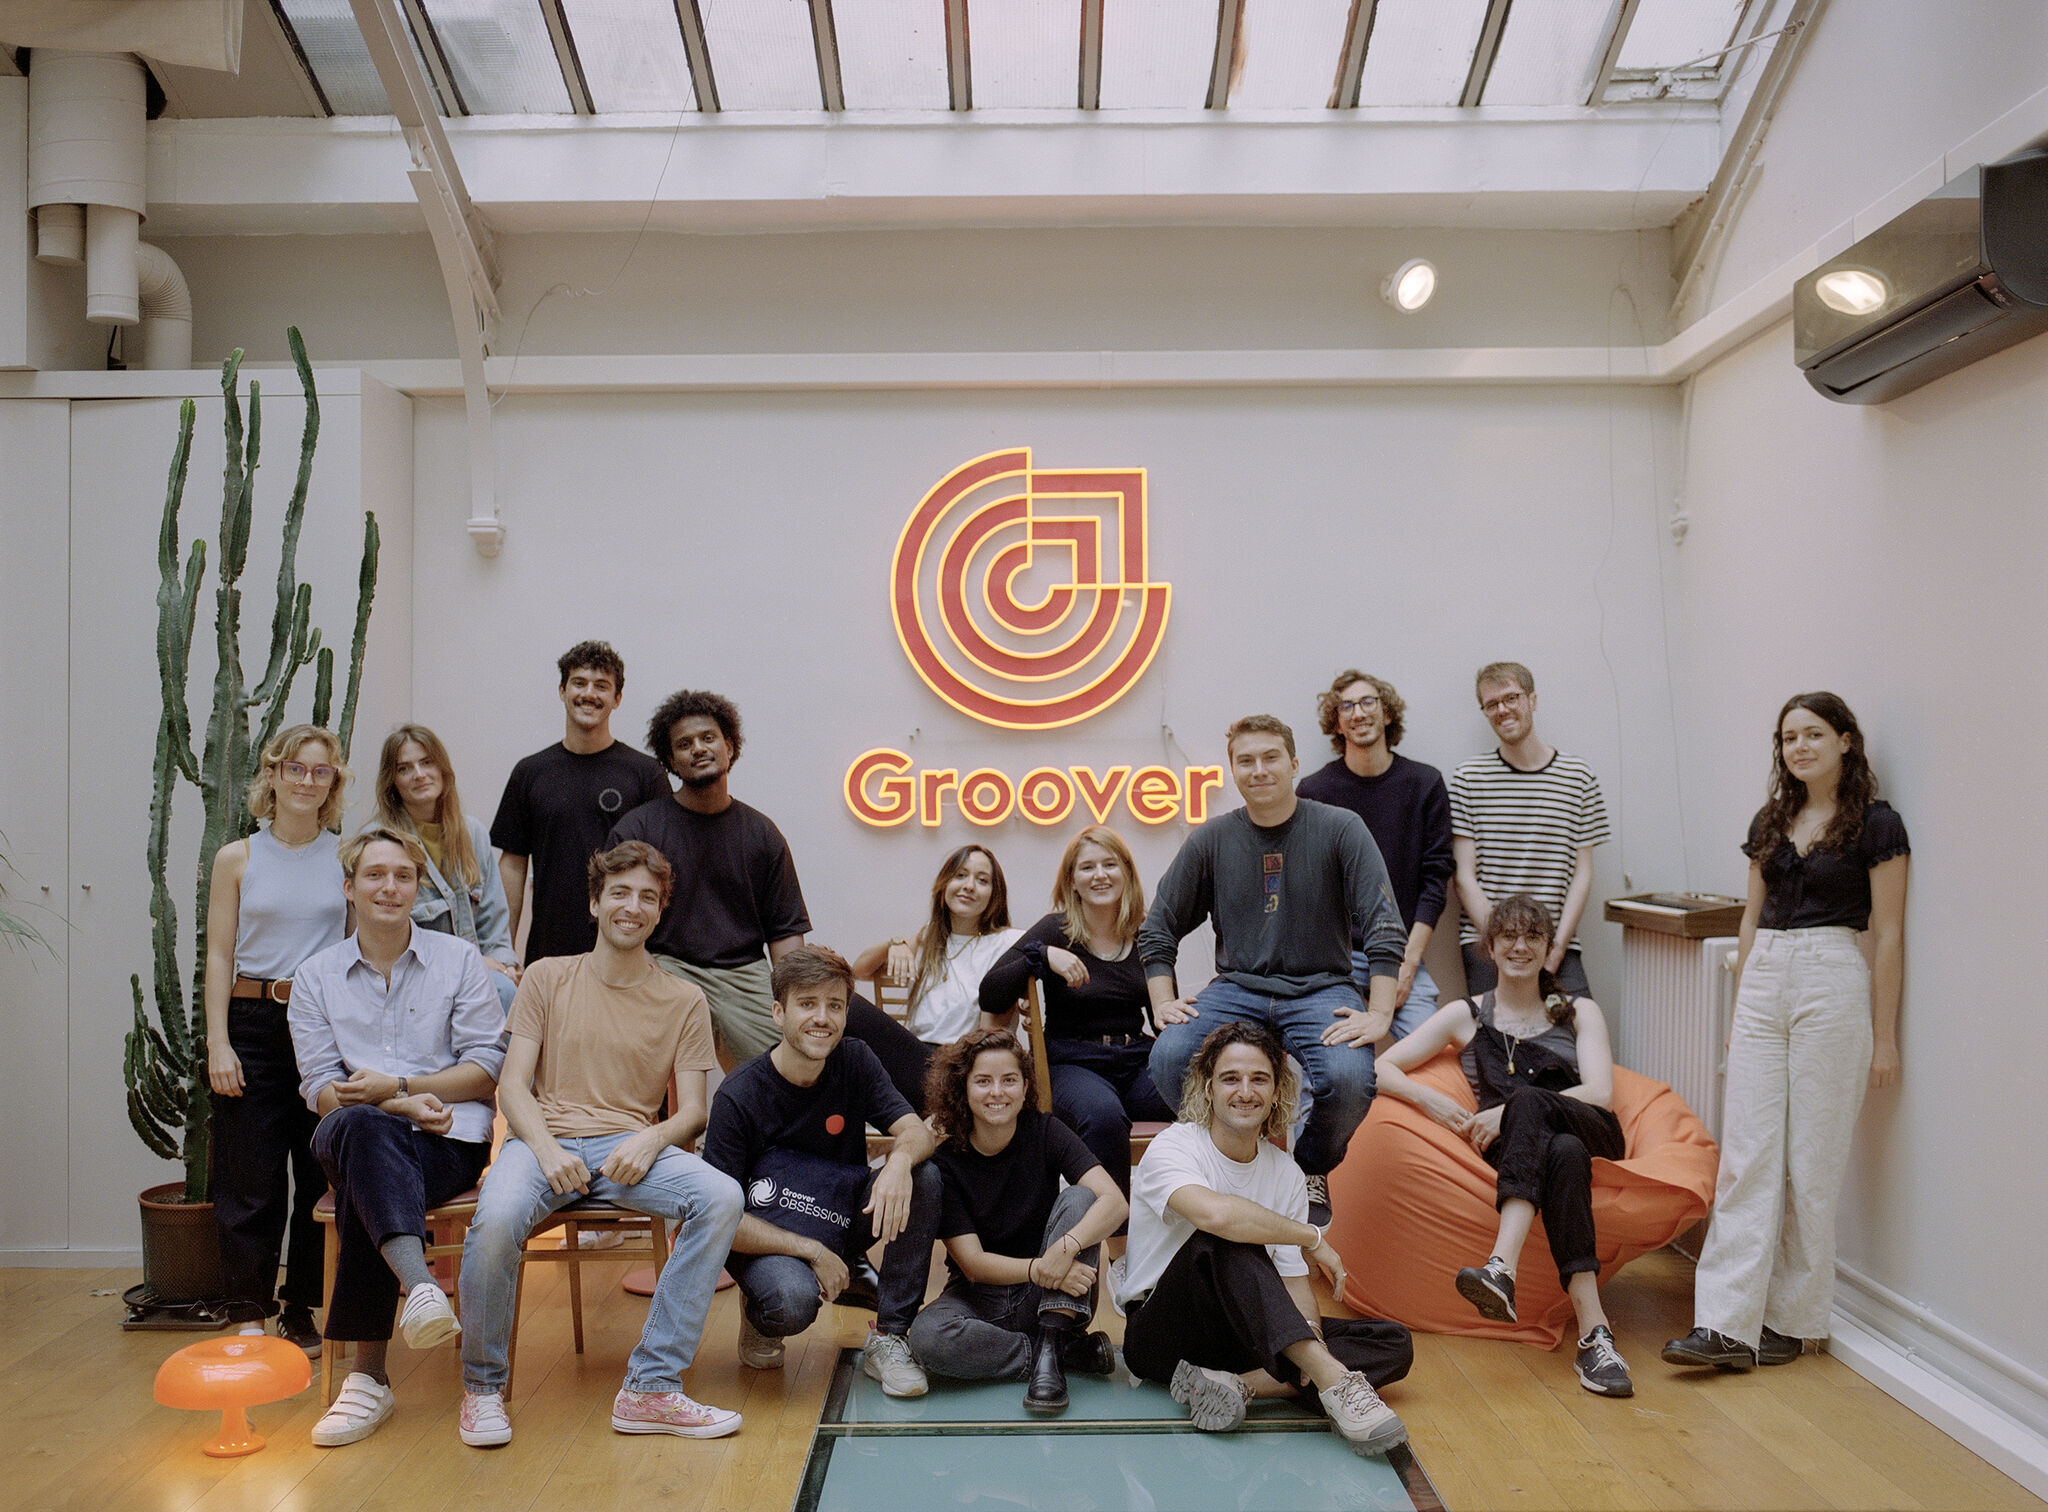 Trind invests in music promotion startup Groover